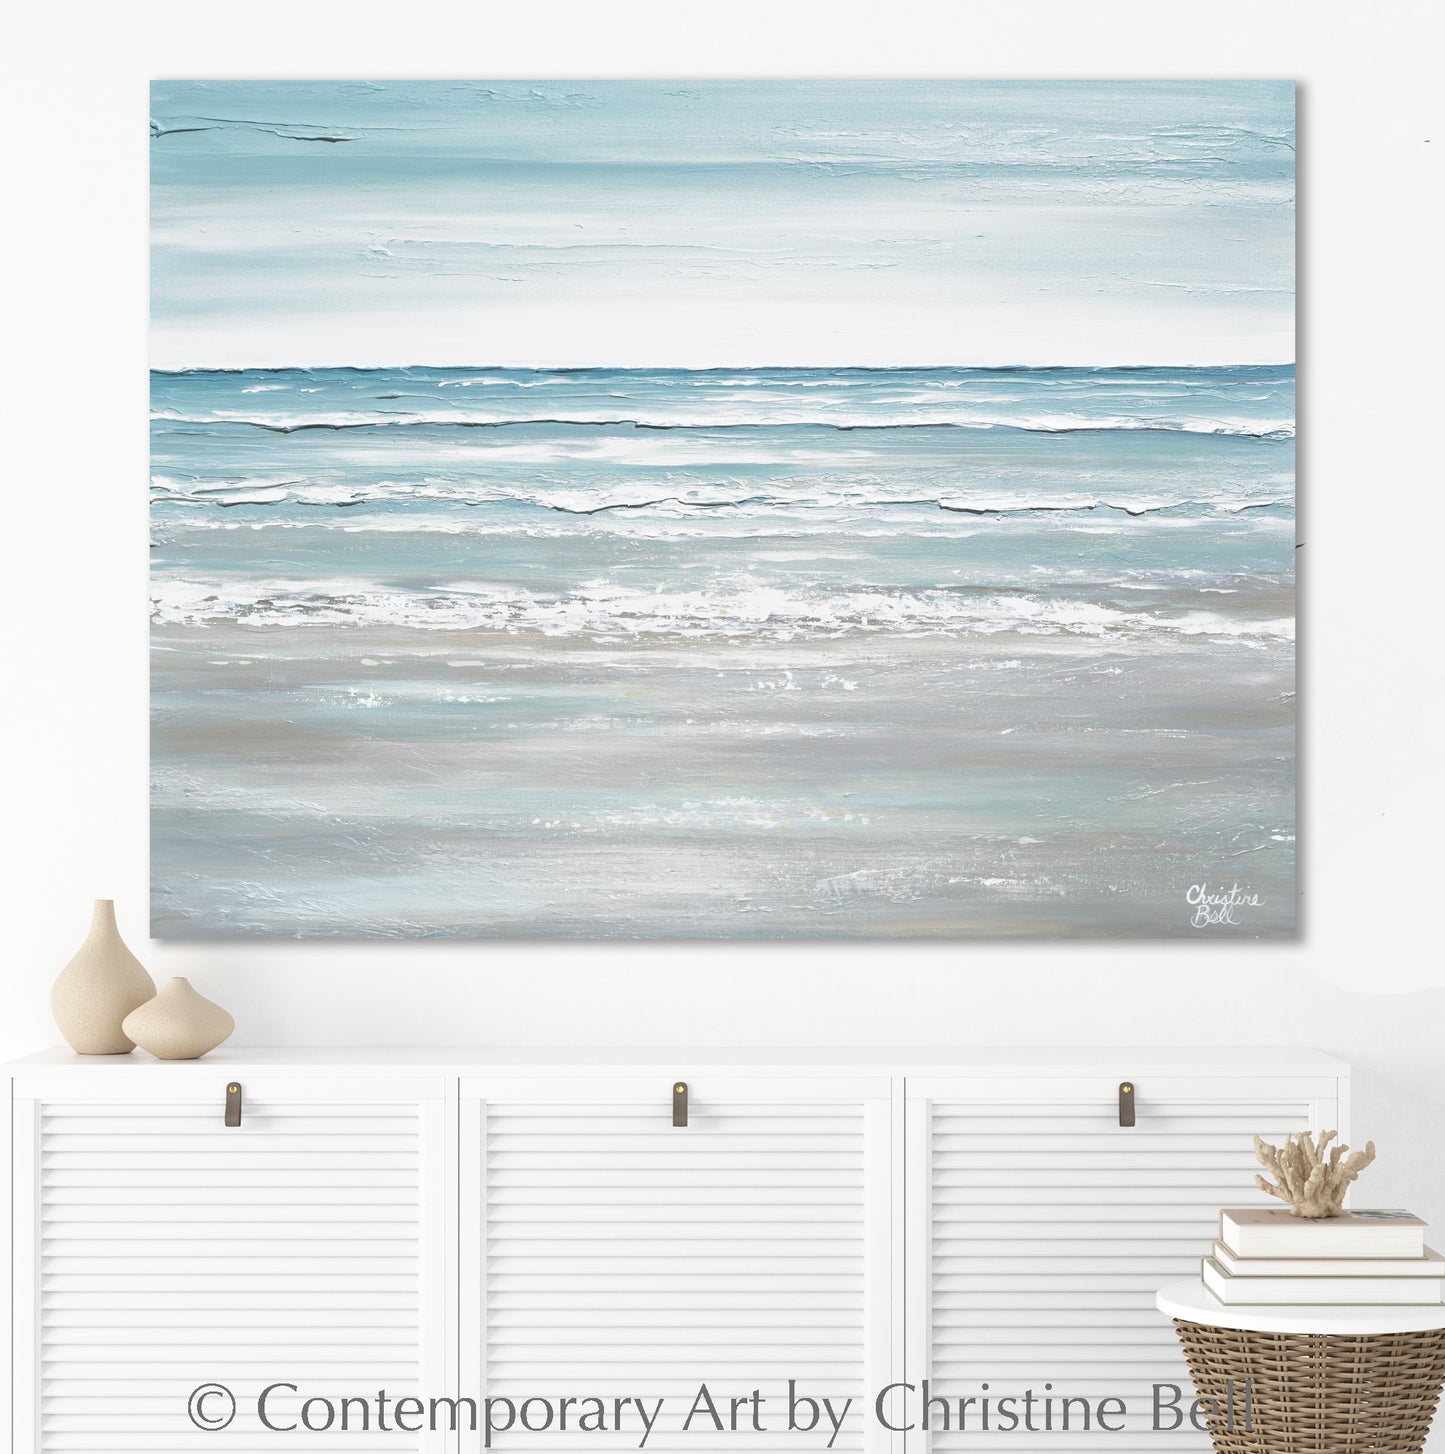 "Staying Afloat" ORIGINAL Textured Seascape Painting 40x30"